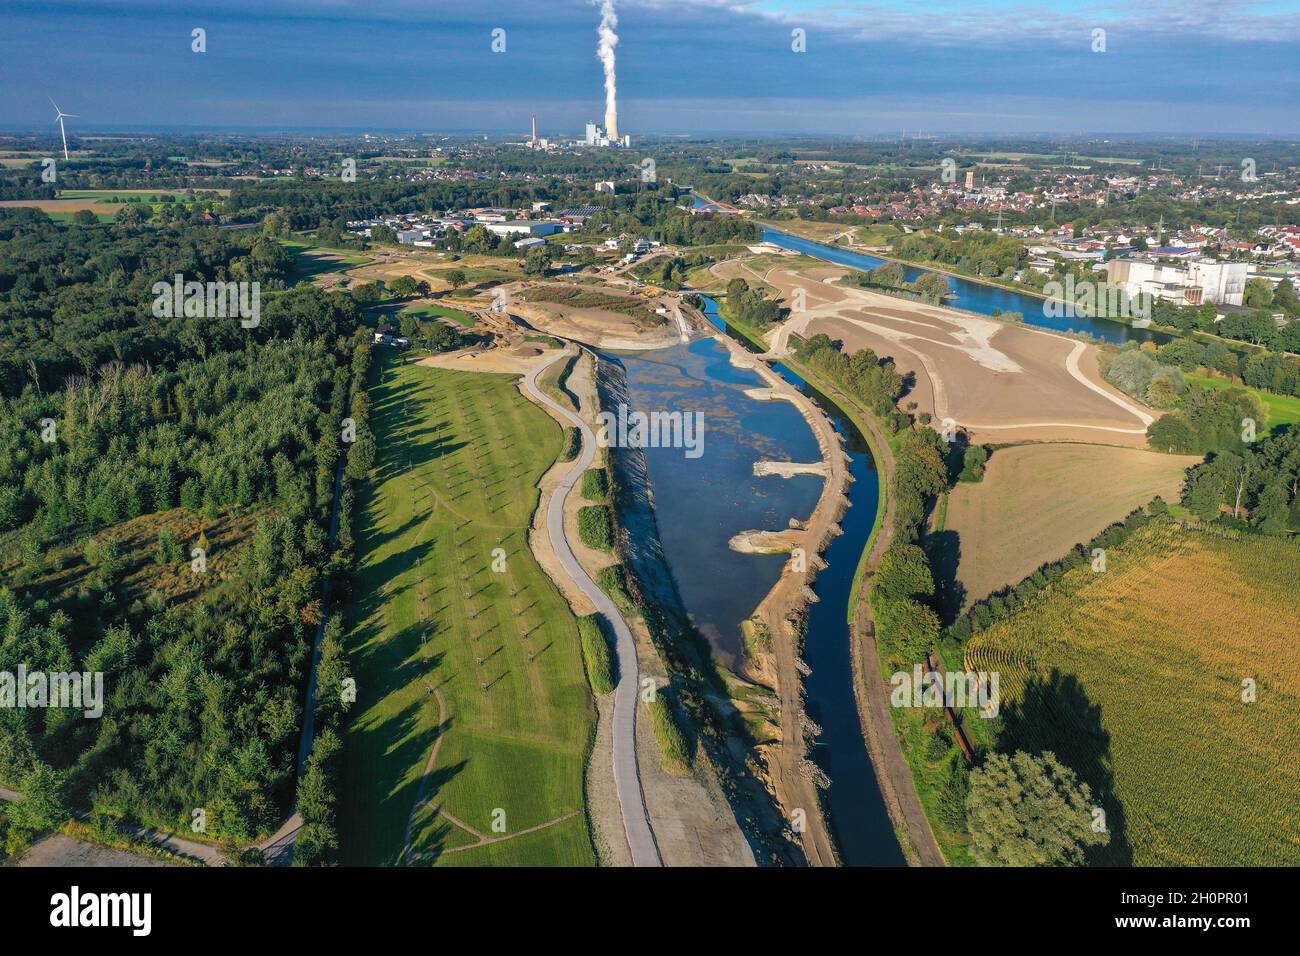 Recklinghausen, Castrop-Rauxel, North Rhine-Westphalia, Germany - Construction project EMSCHERLAND, a 37 hectare water and nature experience park at t Stock Photo